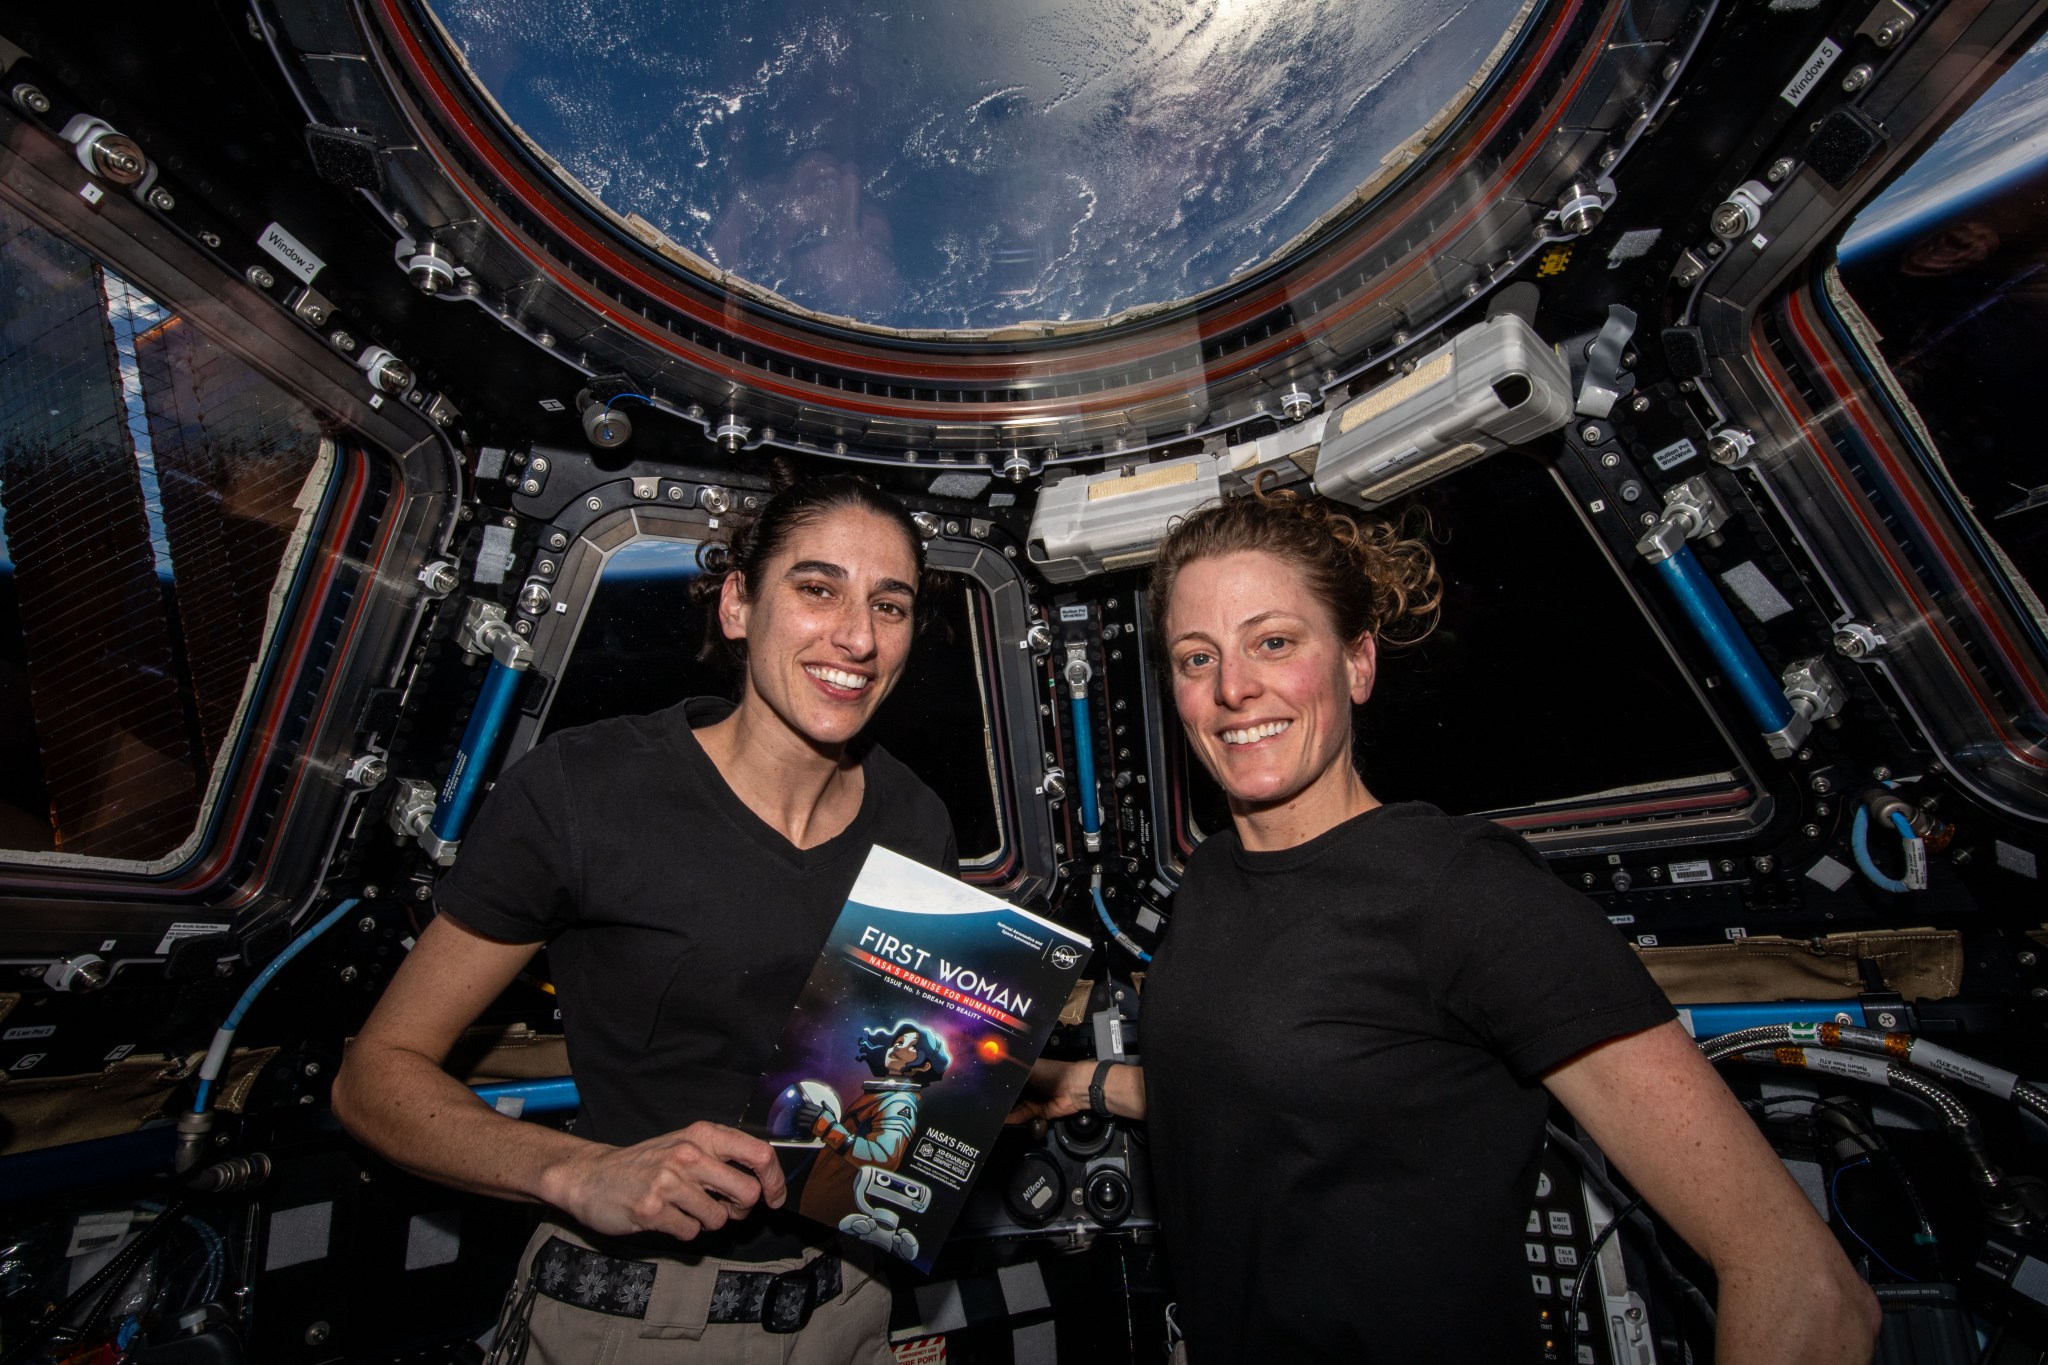 Two astronauts, Jasmin Moghbeli (left) and Loral O'Hara in the cupola of the International Space Station. The cupola has several windows; in the top round window, we can see Earth. The astronauts wear black t-shirts and smile at the camera. Moghbeli holds a copy of First Woman, NASA's official graphic novel about a fictional astronaut who is the first woman to explore the Moon.